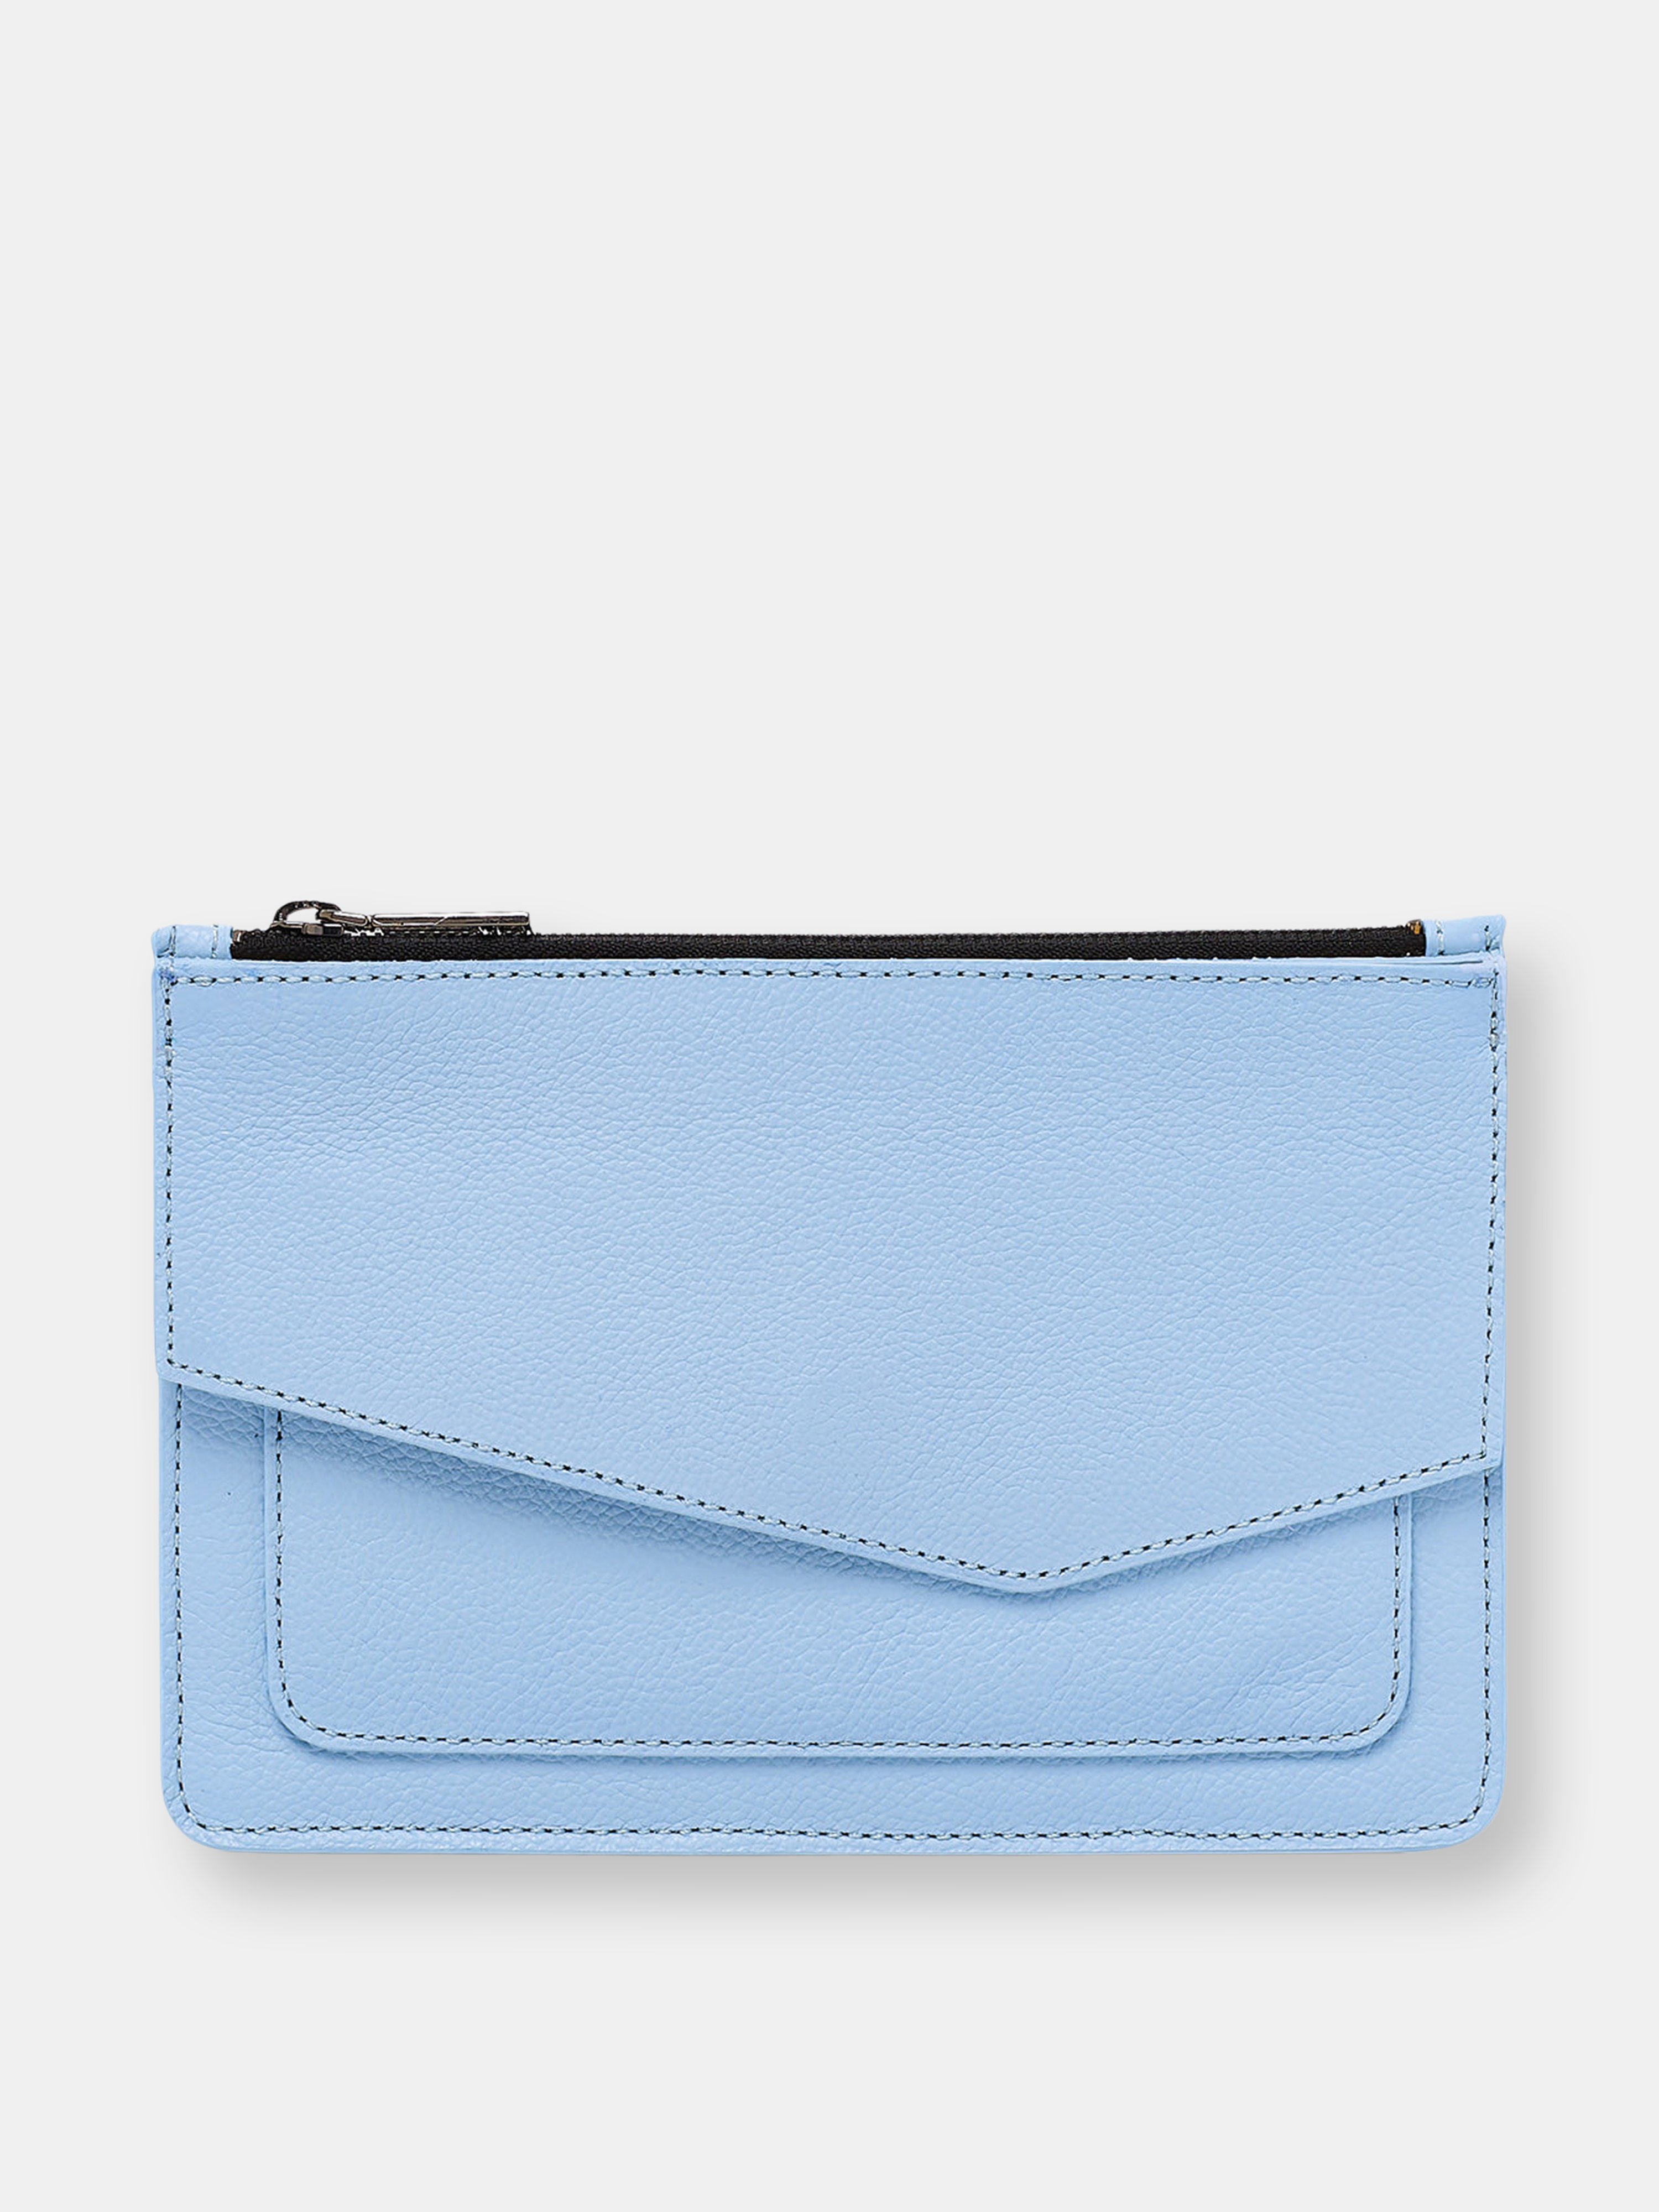 Botkier Cobble Hill Large Clutch In Blue